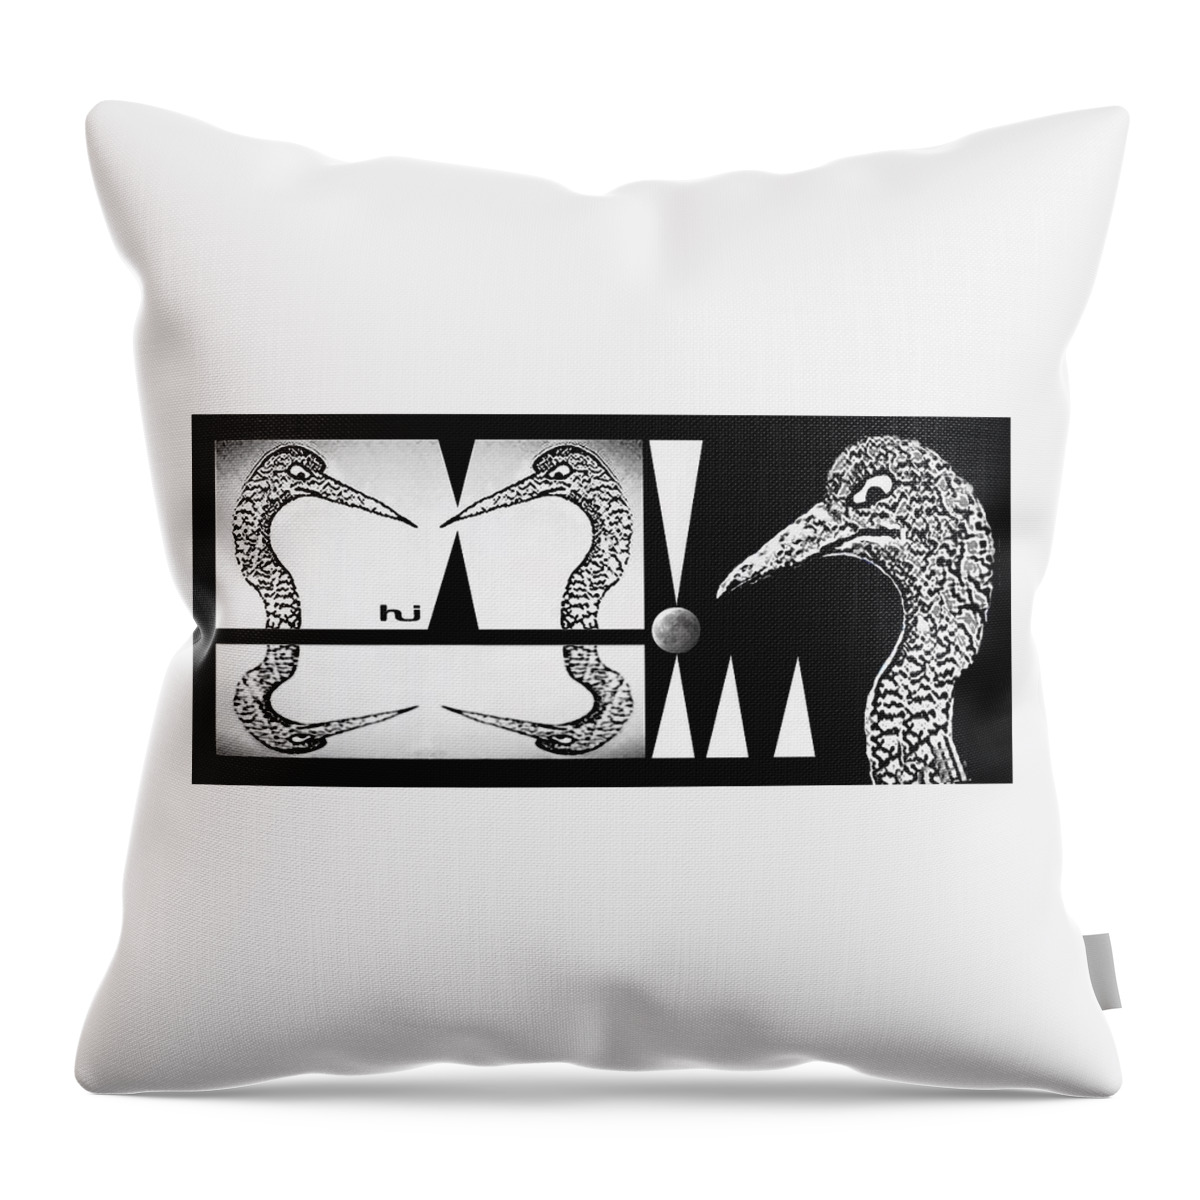 Bird Throw Pillow featuring the mixed media The Birds Are Angry by Hartmut Jager